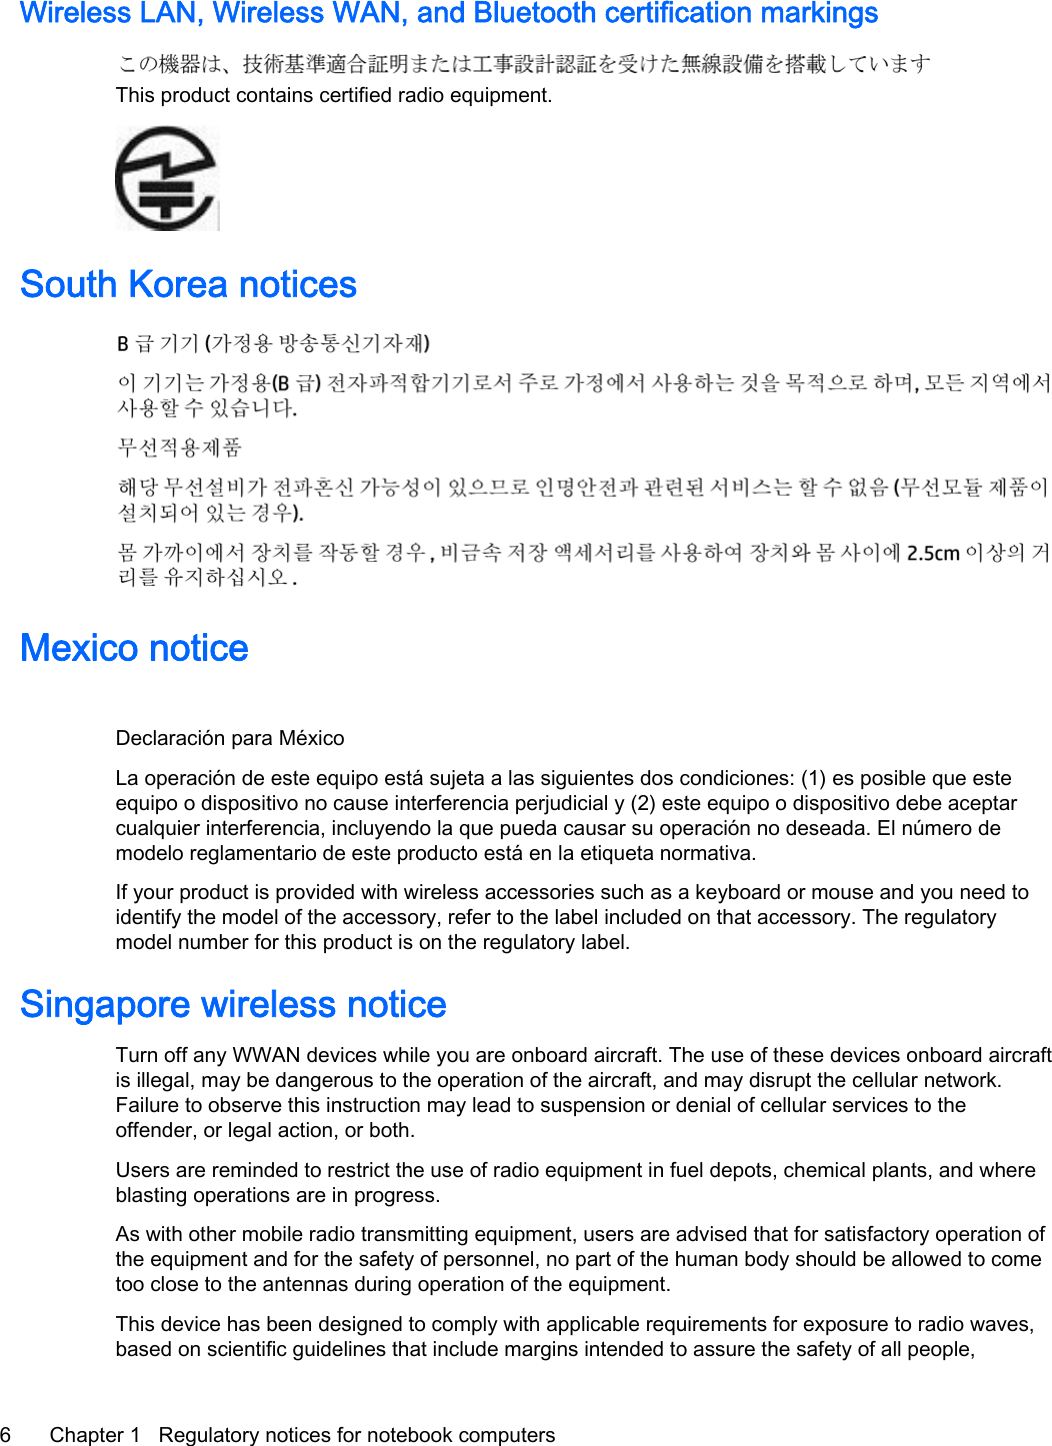 Wireless LAN, Wireless WAN, and Bluetooth certification markingsThis product contains certified radio equipment.South Korea noticesMexico noticeDeclaración para MéxicoLa operación de este equipo está sujeta a las siguientes dos condiciones: (1) es posible que esteequipo o dispositivo no cause interferencia perjudicial y (2) este equipo o dispositivo debe aceptarcualquier interferencia, incluyendo la que pueda causar su operación no deseada. El número demodelo reglamentario de este producto está en la etiqueta normativa.If your product is provided with wireless accessories such as a keyboard or mouse and you need toidentify the model of the accessory, refer to the label included on that accessory. The regulatorymodel number for this product is on the regulatory label.Singapore wireless noticeTurn off any WWAN devices while you are onboard aircraft. The use of these devices onboard aircraftis illegal, may be dangerous to the operation of the aircraft, and may disrupt the cellular network.Failure to observe this instruction may lead to suspension or denial of cellular services to theoffender, or legal action, or both.Users are reminded to restrict the use of radio equipment in fuel depots, chemical plants, and whereblasting operations are in progress.As with other mobile radio transmitting equipment, users are advised that for satisfactory operation ofthe equipment and for the safety of personnel, no part of the human body should be allowed to cometoo close to the antennas during operation of the equipment.This device has been designed to comply with applicable requirements for exposure to radio waves,based on scientific guidelines that include margins intended to assure the safety of all people,6 Chapter 1   Regulatory notices for notebook computers